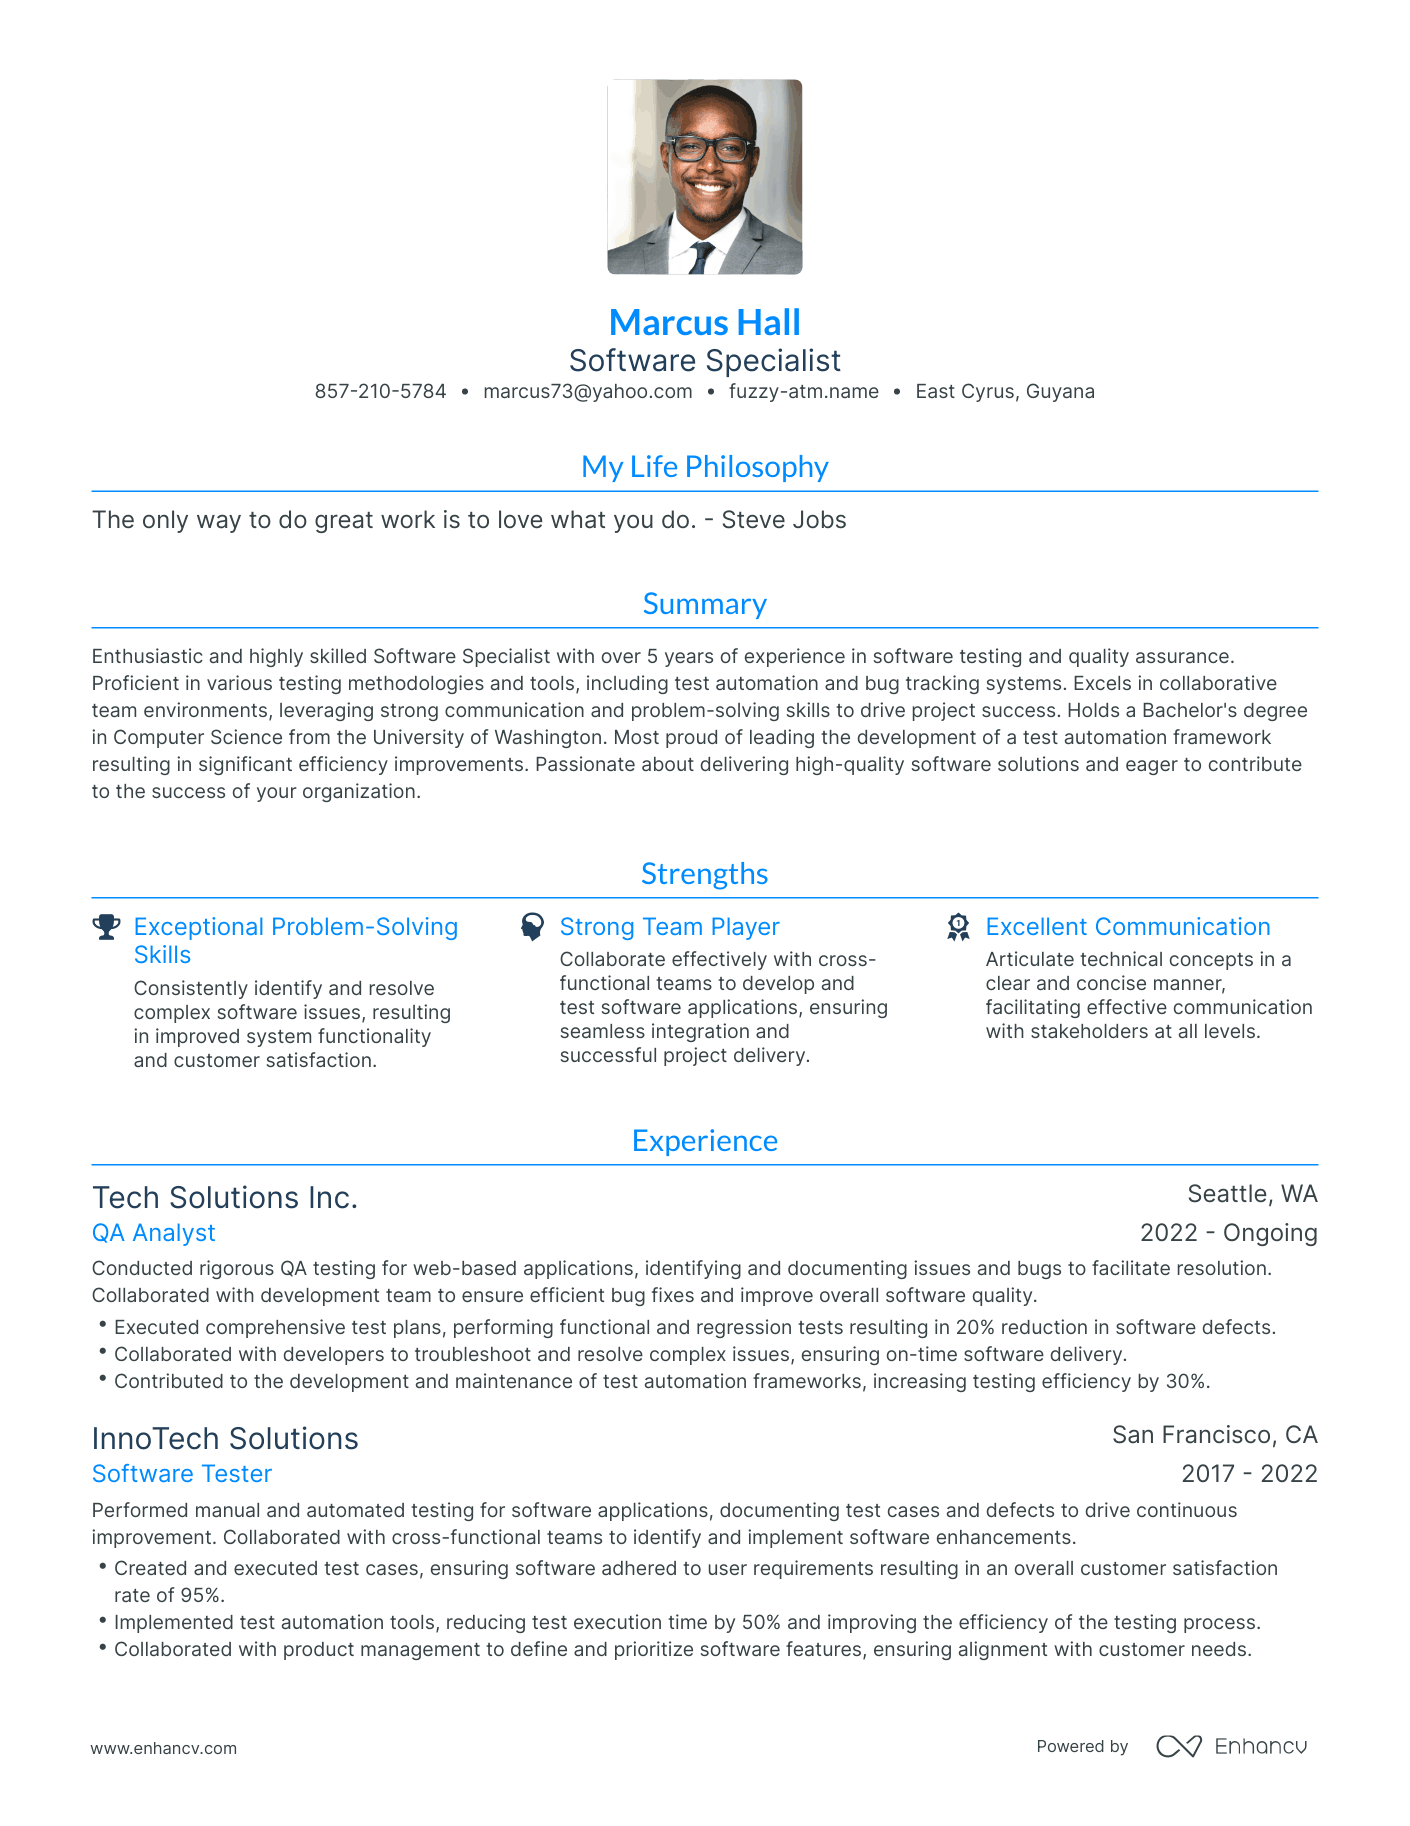 Modern Software Specialist Resume Example